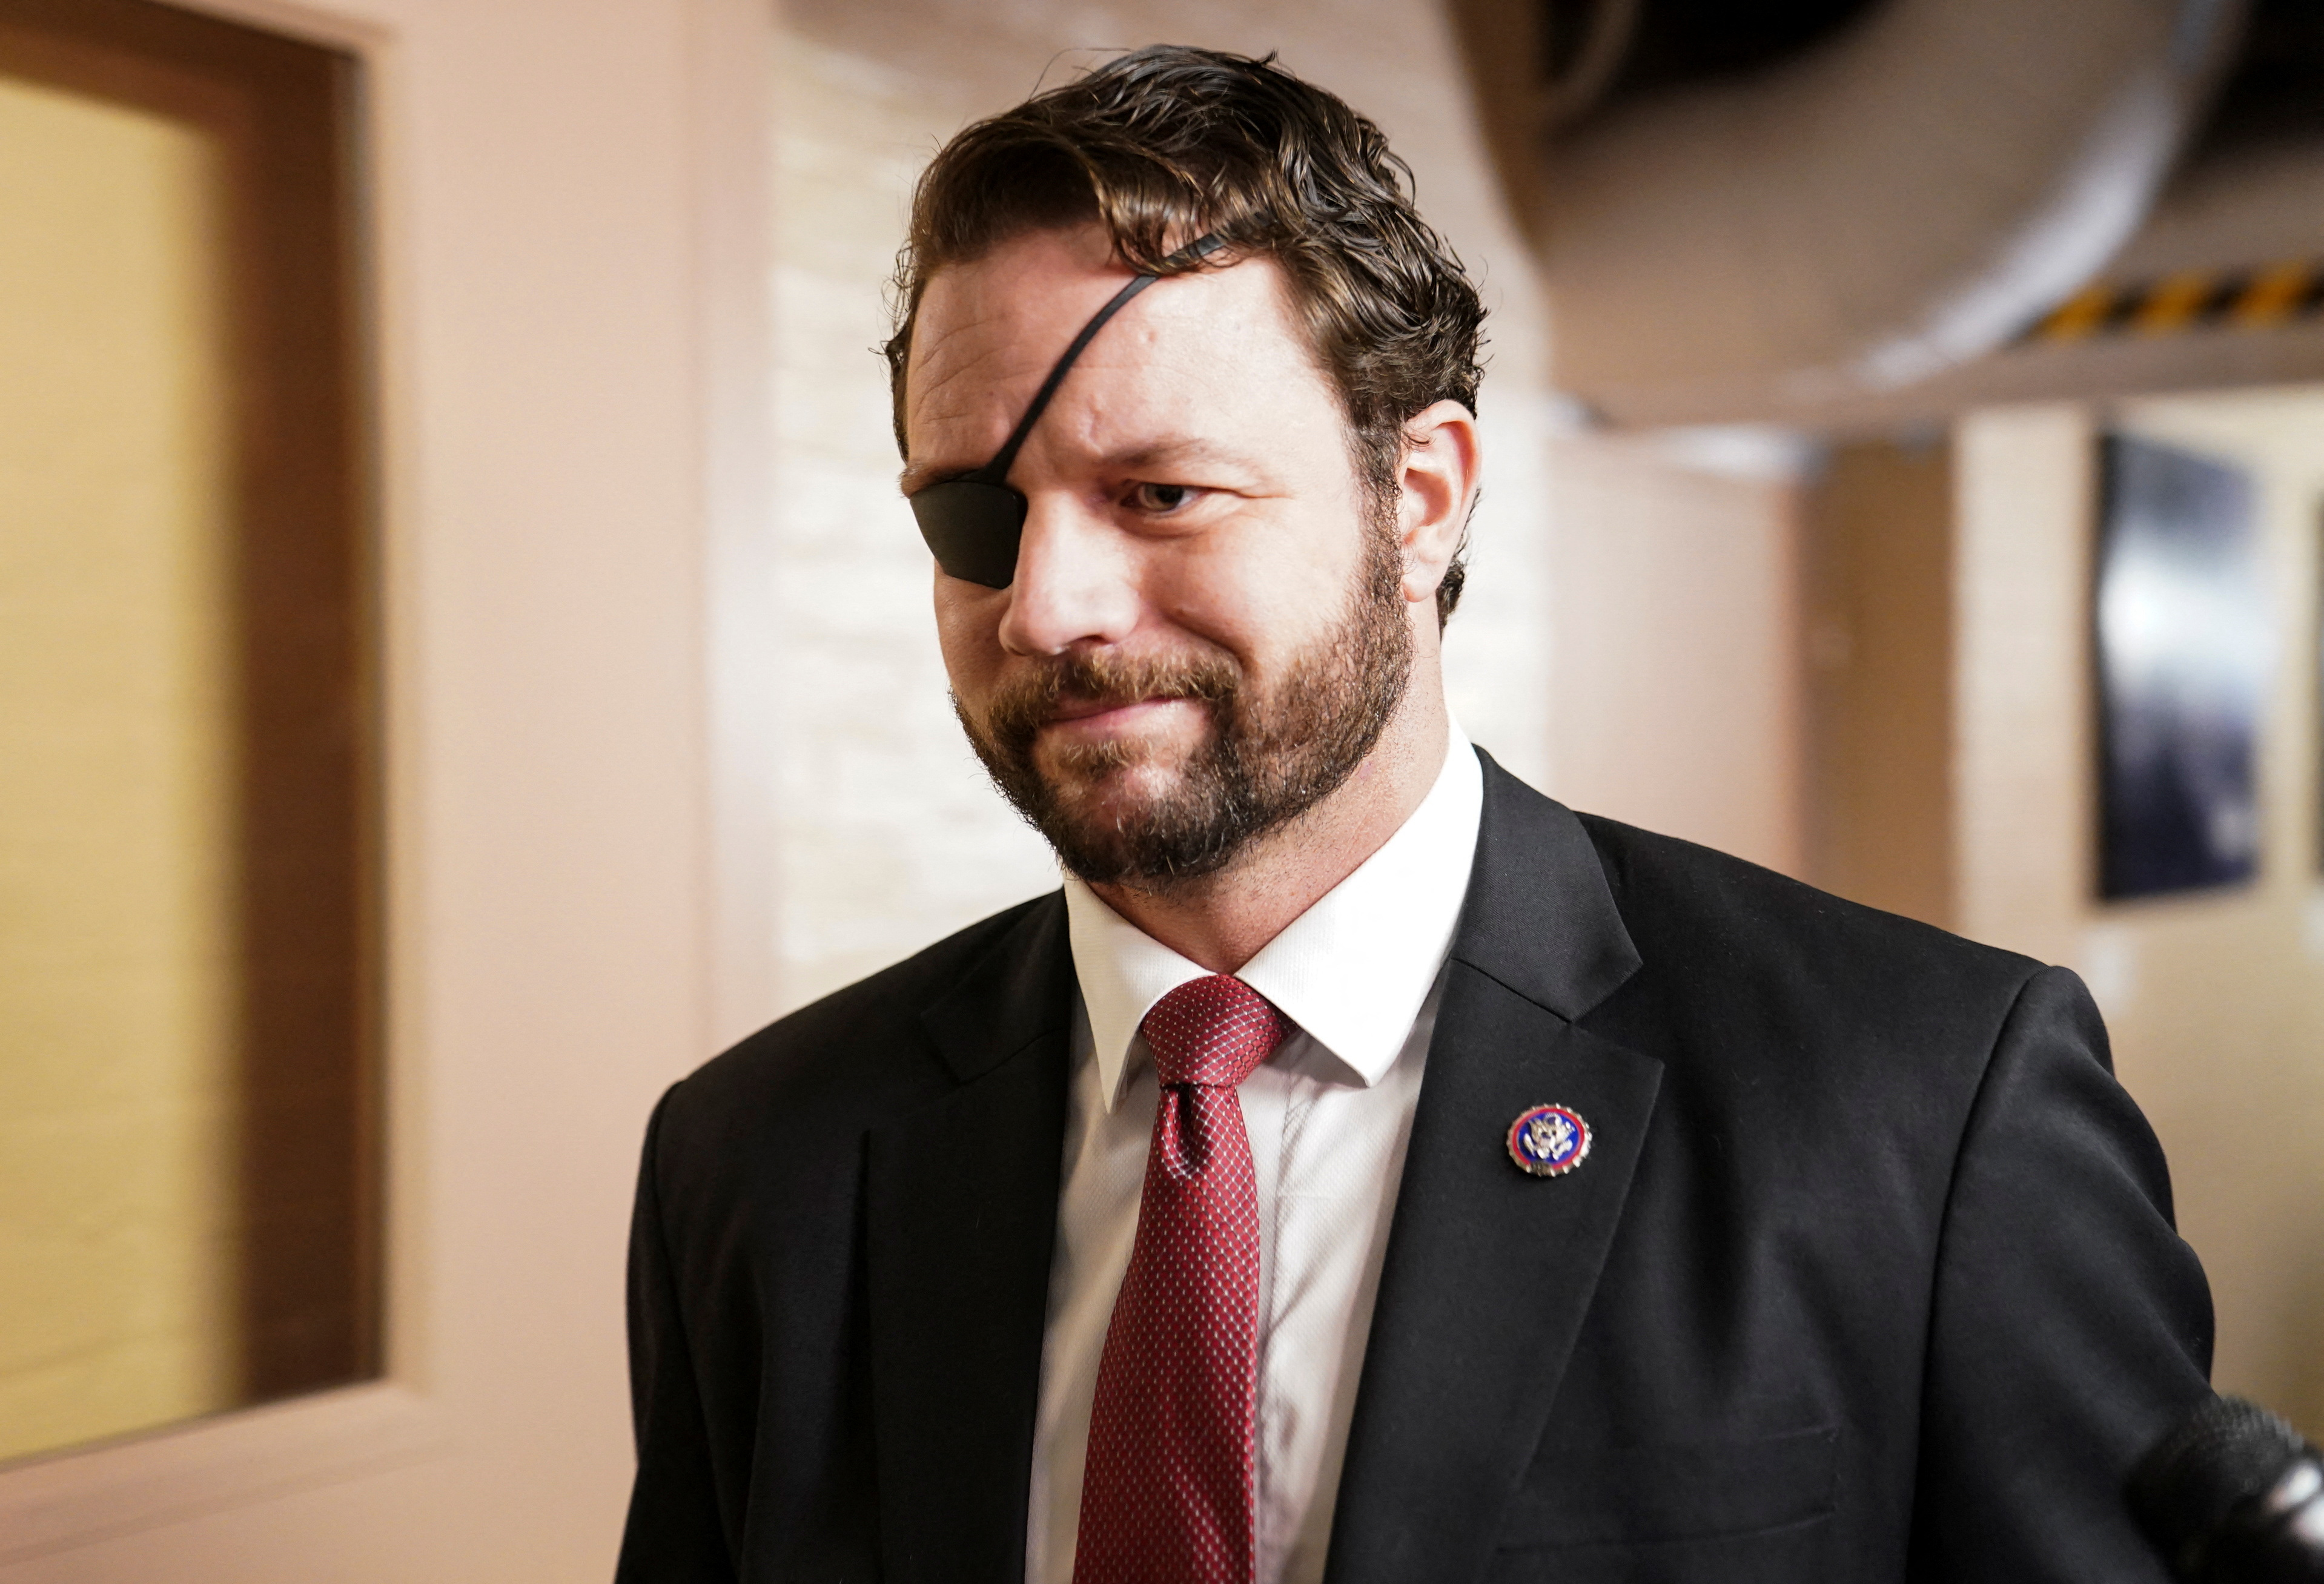 Dan Crenshaw denied that the US seeks to invade Mexico militarily (REUTERS/Jon Cherry)